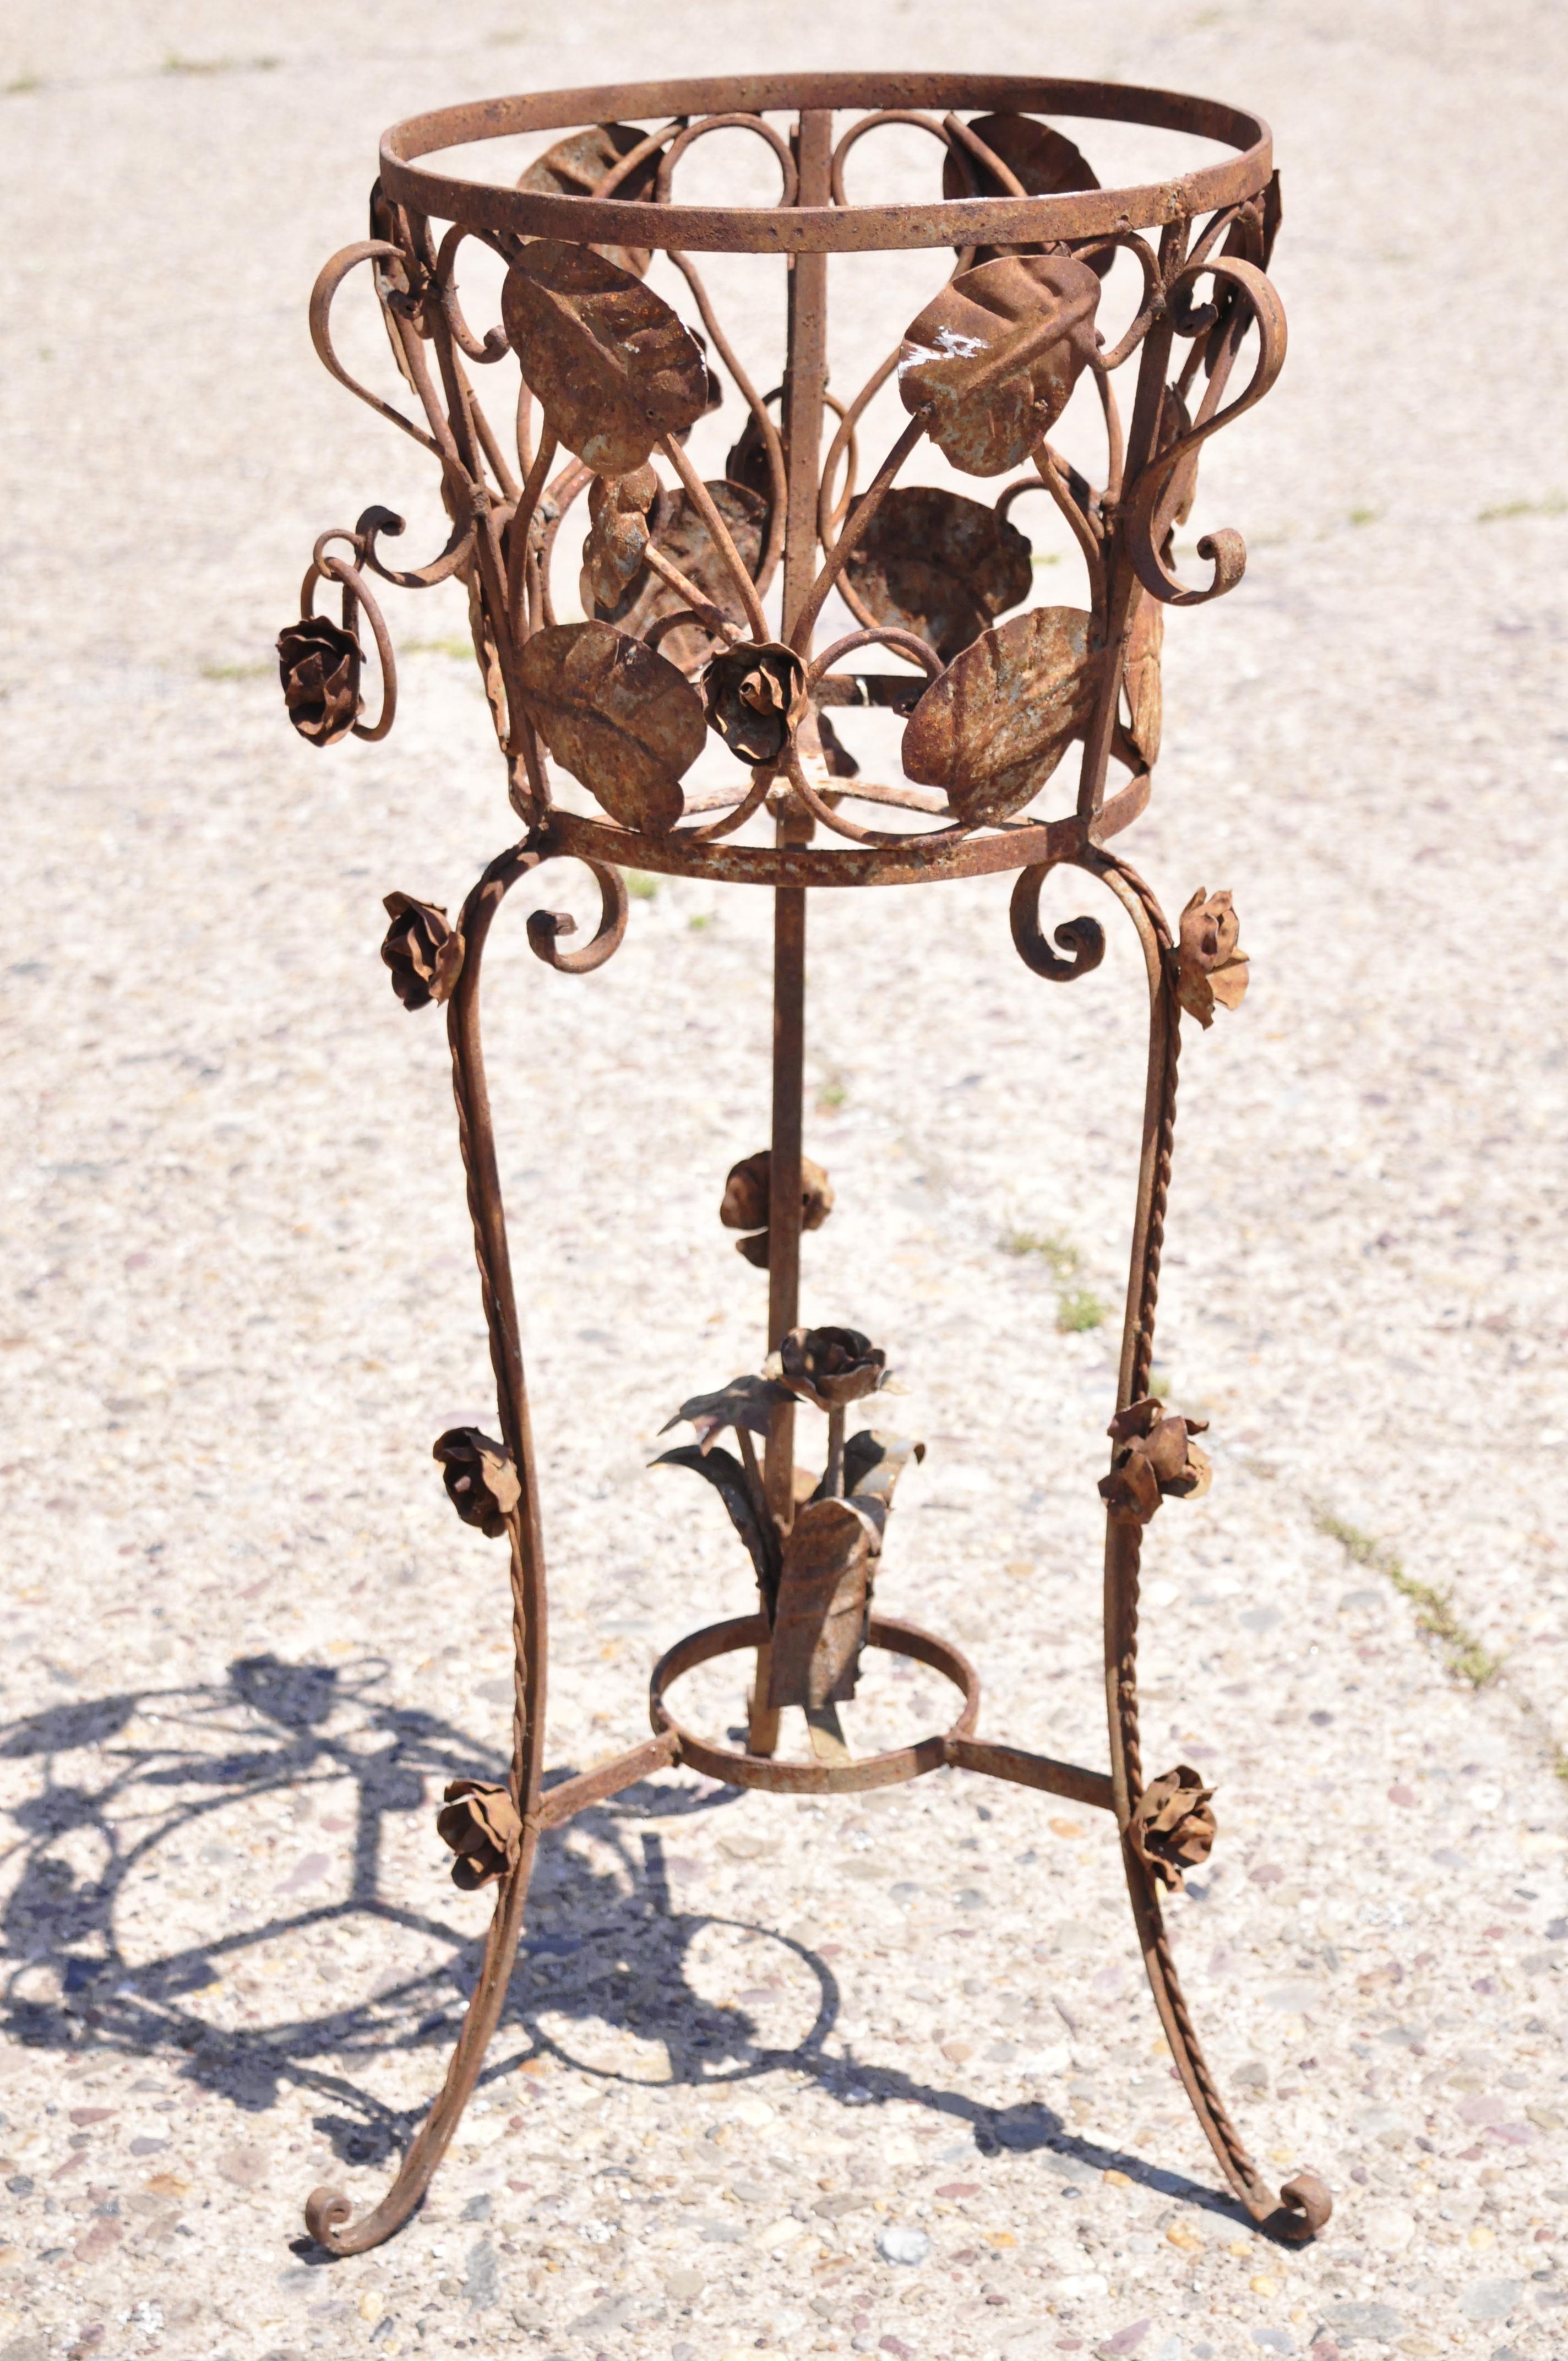 Vintage French Art Nouveau wrought iron leaf vine garden planter pot flower stand. Item features leaf and vine design work, scrolling base, wrought iron construction, great style and form. Circa Mid 20th Century. Measurements: 36